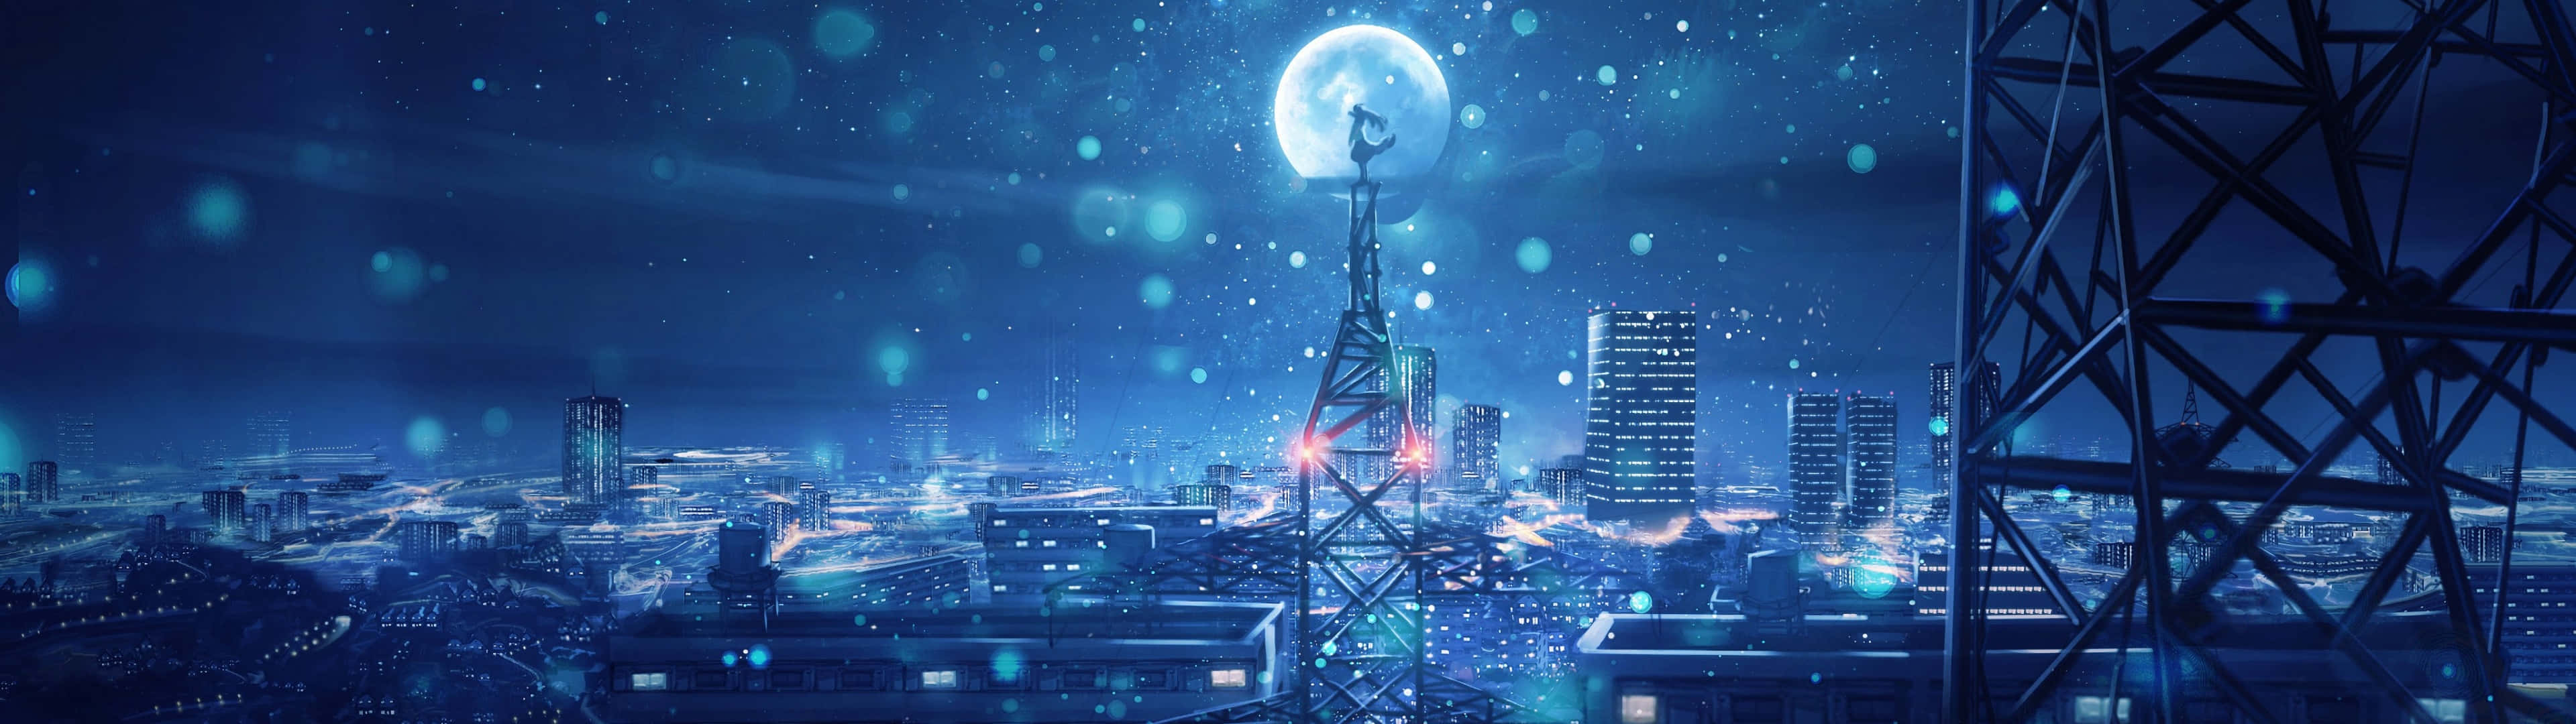 3840x1080 Anime City Falling Snow Picture